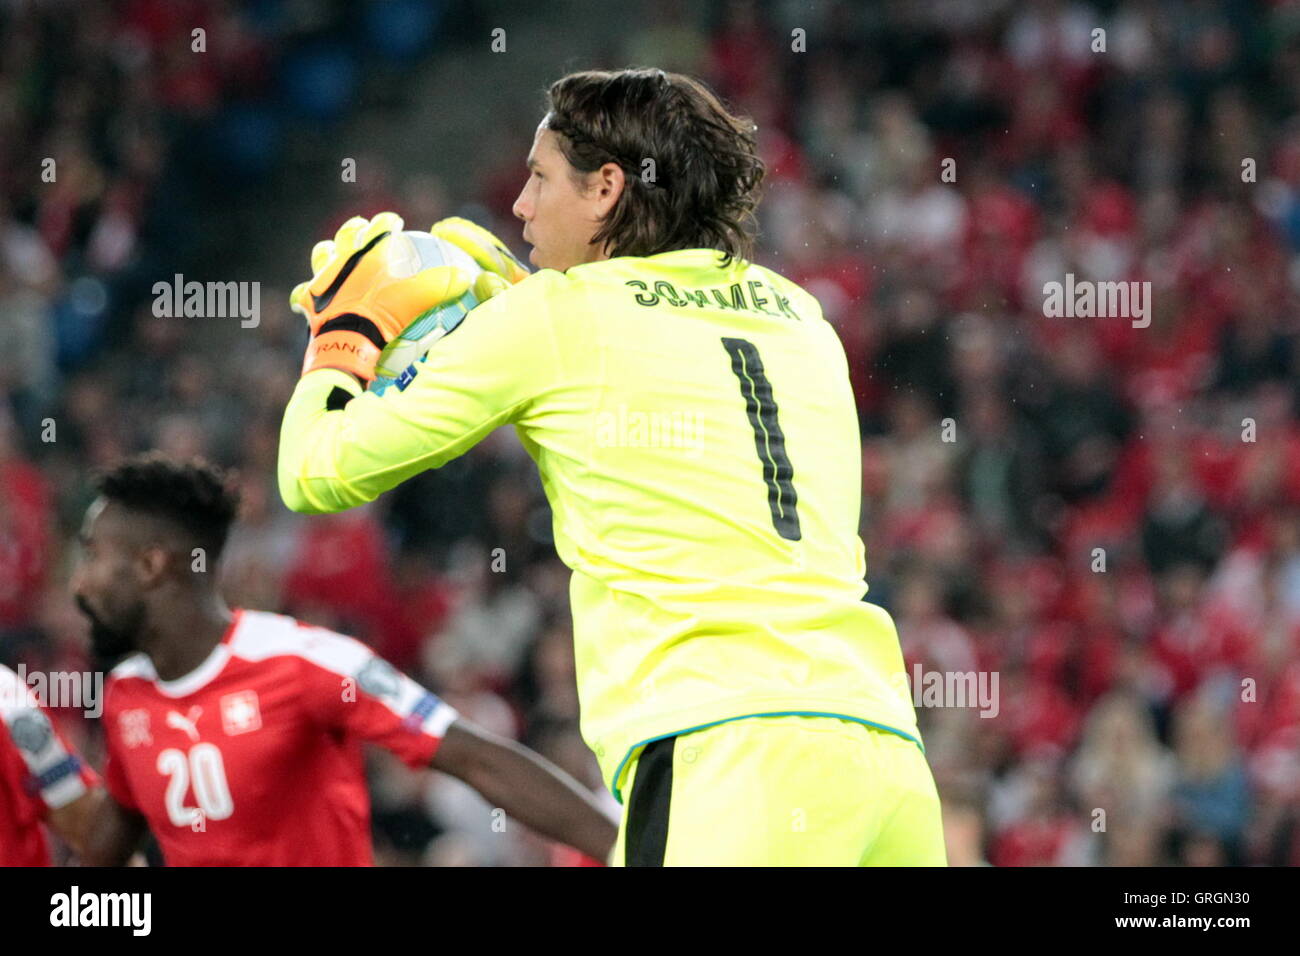 06.09.2016. St Jakob-Park, Basel, Switzerland. Goalkeeper Yann Sommer catches the ball cleanly  during the qualifying match of the World Cup Group B Switzerland against Portugal at St Jakob Park in Basel, Switzerland Stock Photo